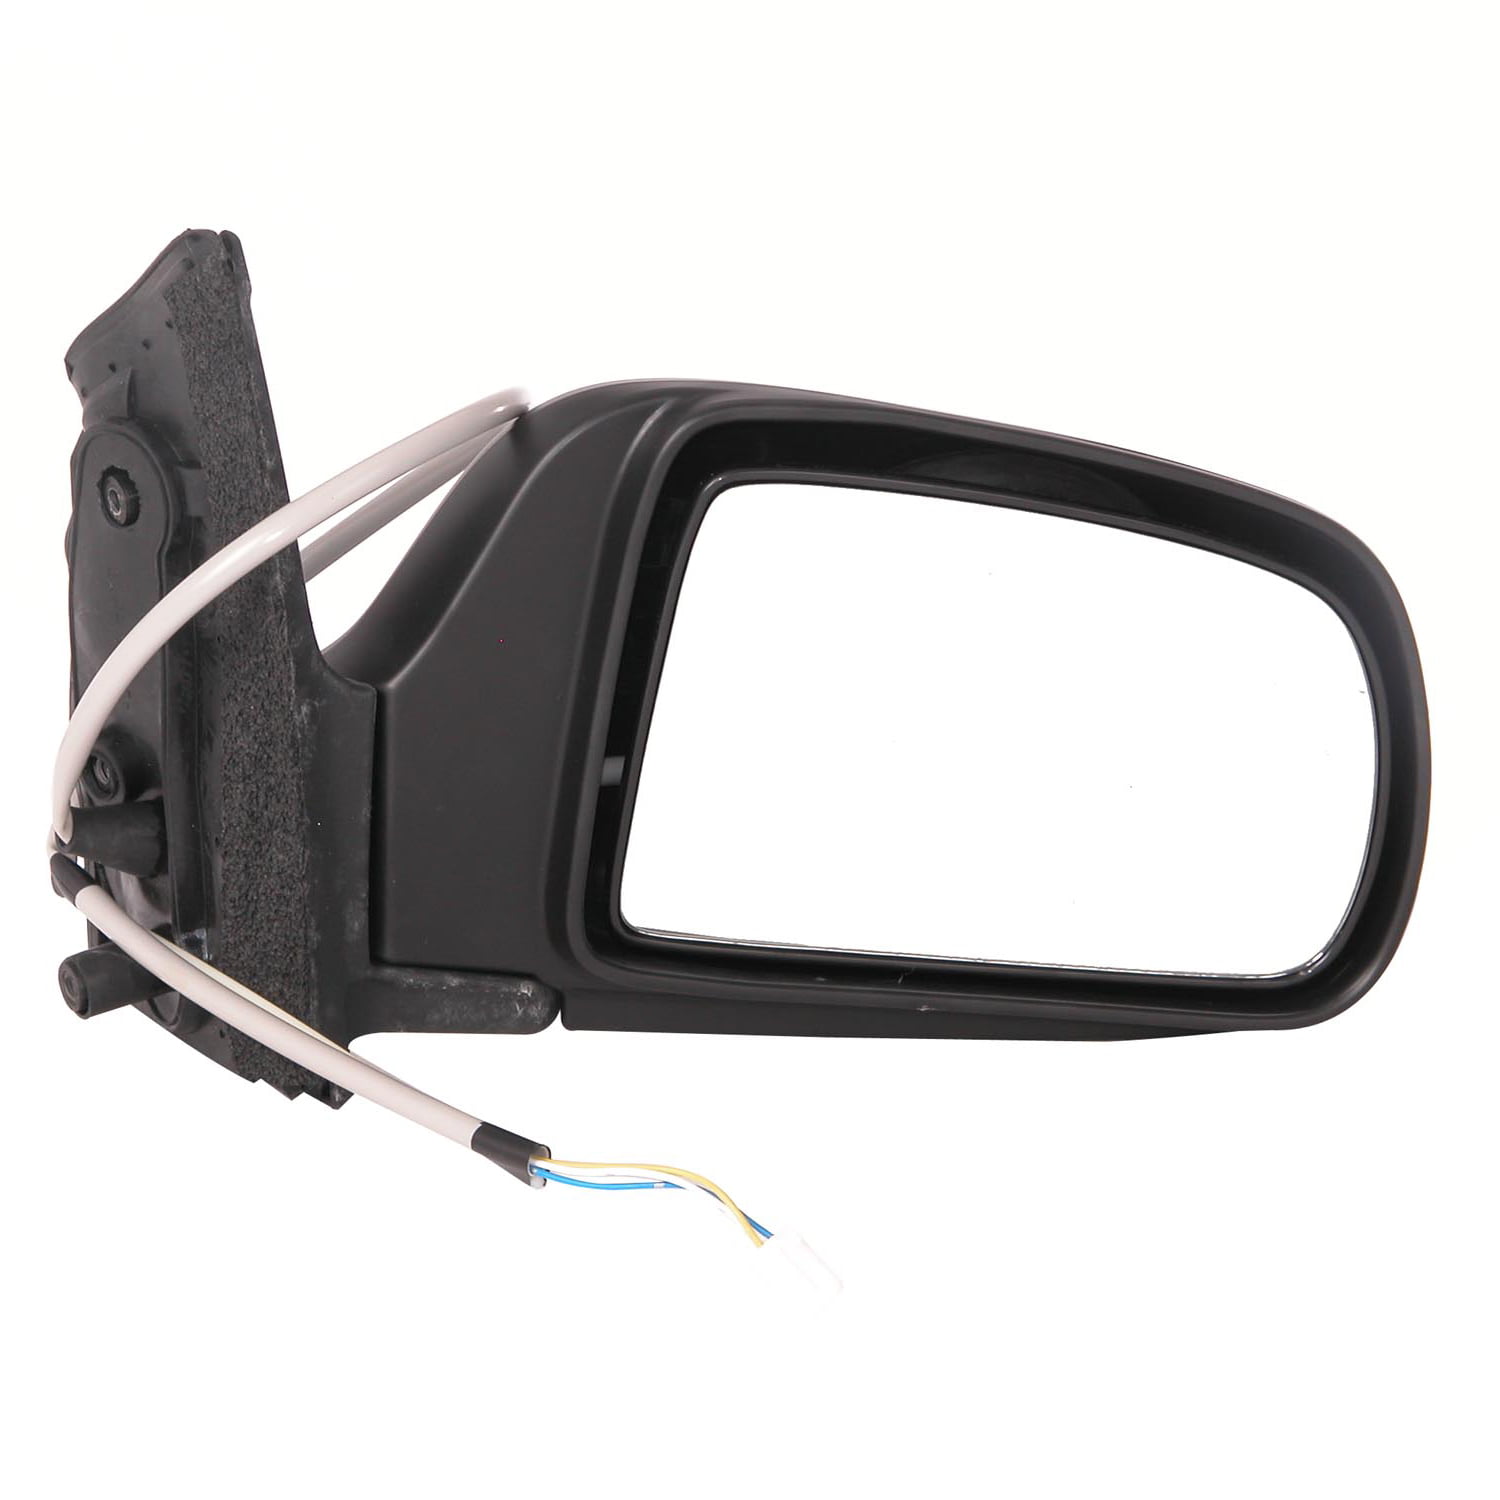 Original Style Replacement Mirror Toyota Passenger Side Power Remote Foldaway Non-Heated Black